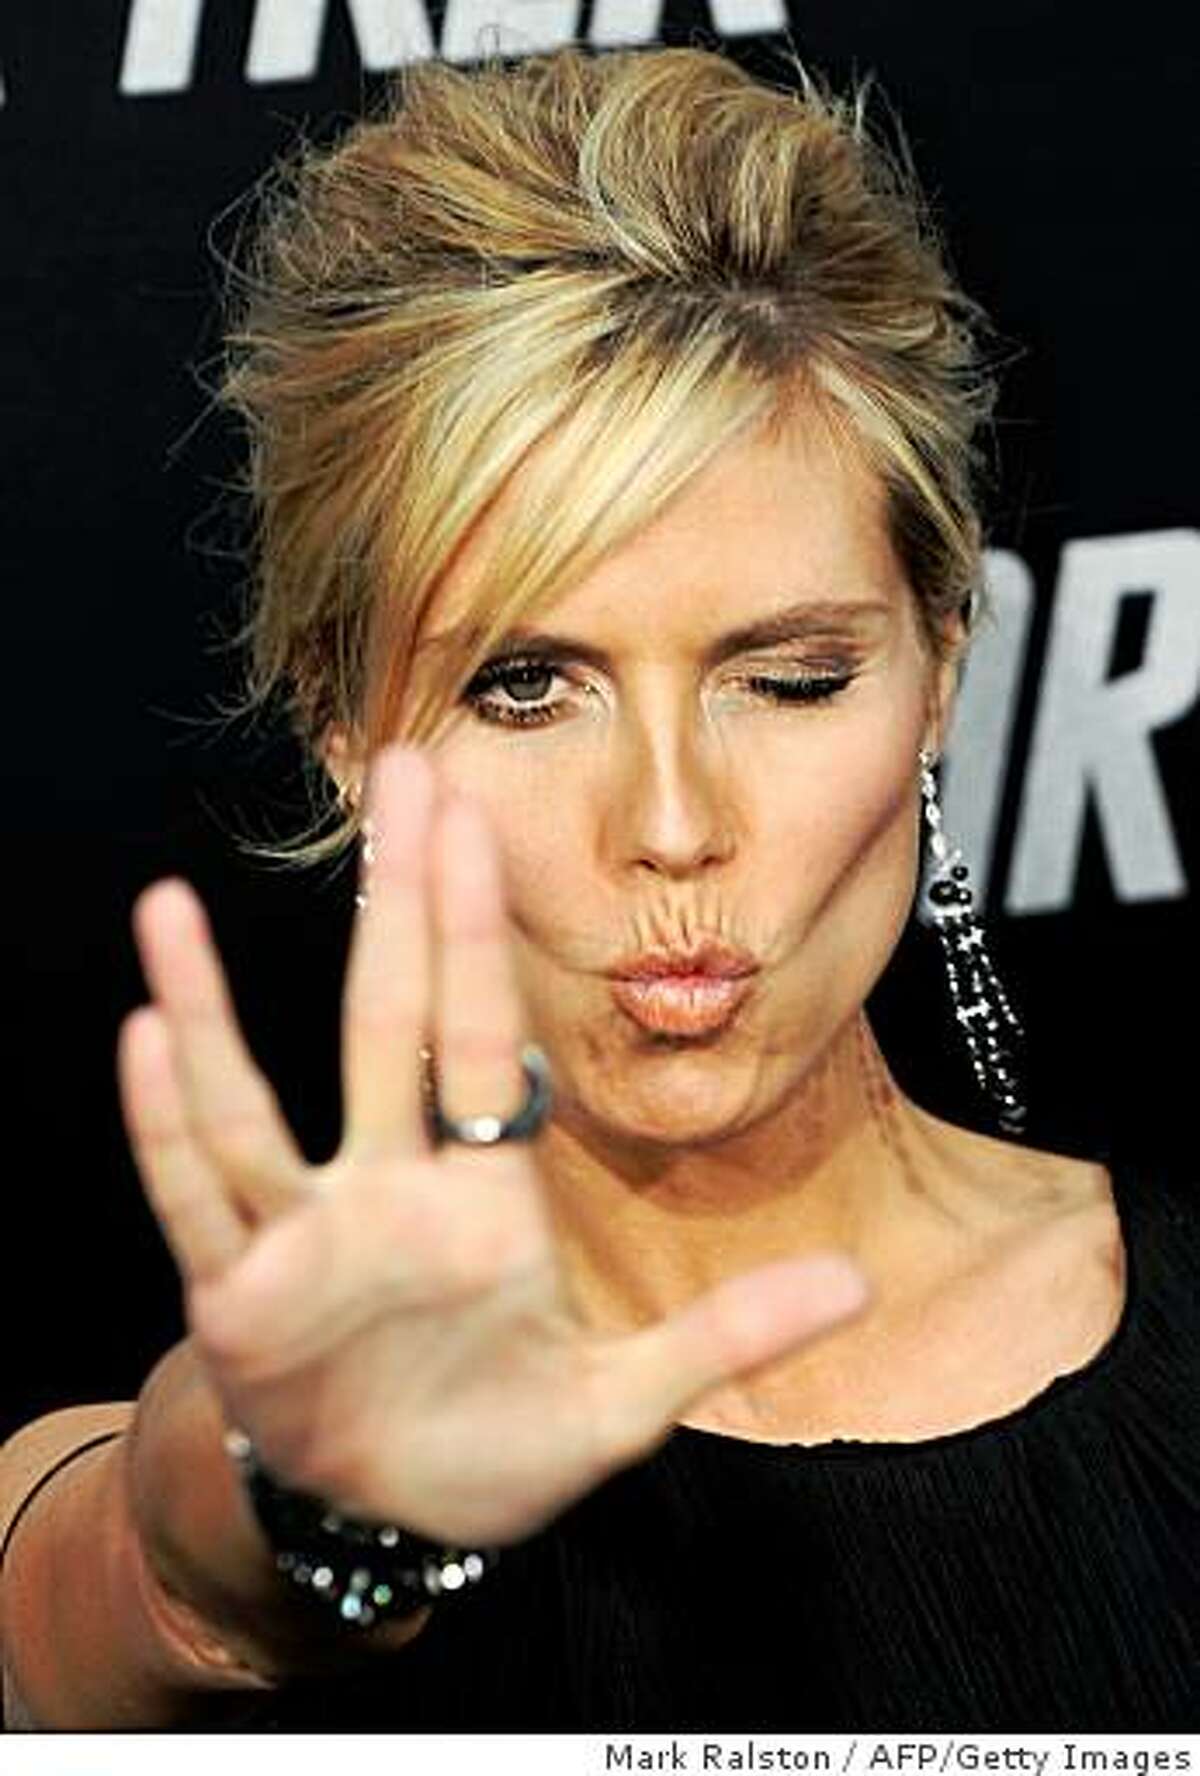 Model Heidi Klum flashes a "Star Trek" salute as she arrives at Grauman's Chinese Theatre in Hollywood for the premiere of the movie "Star Trek" in Los Angeles on April 30, 2009.